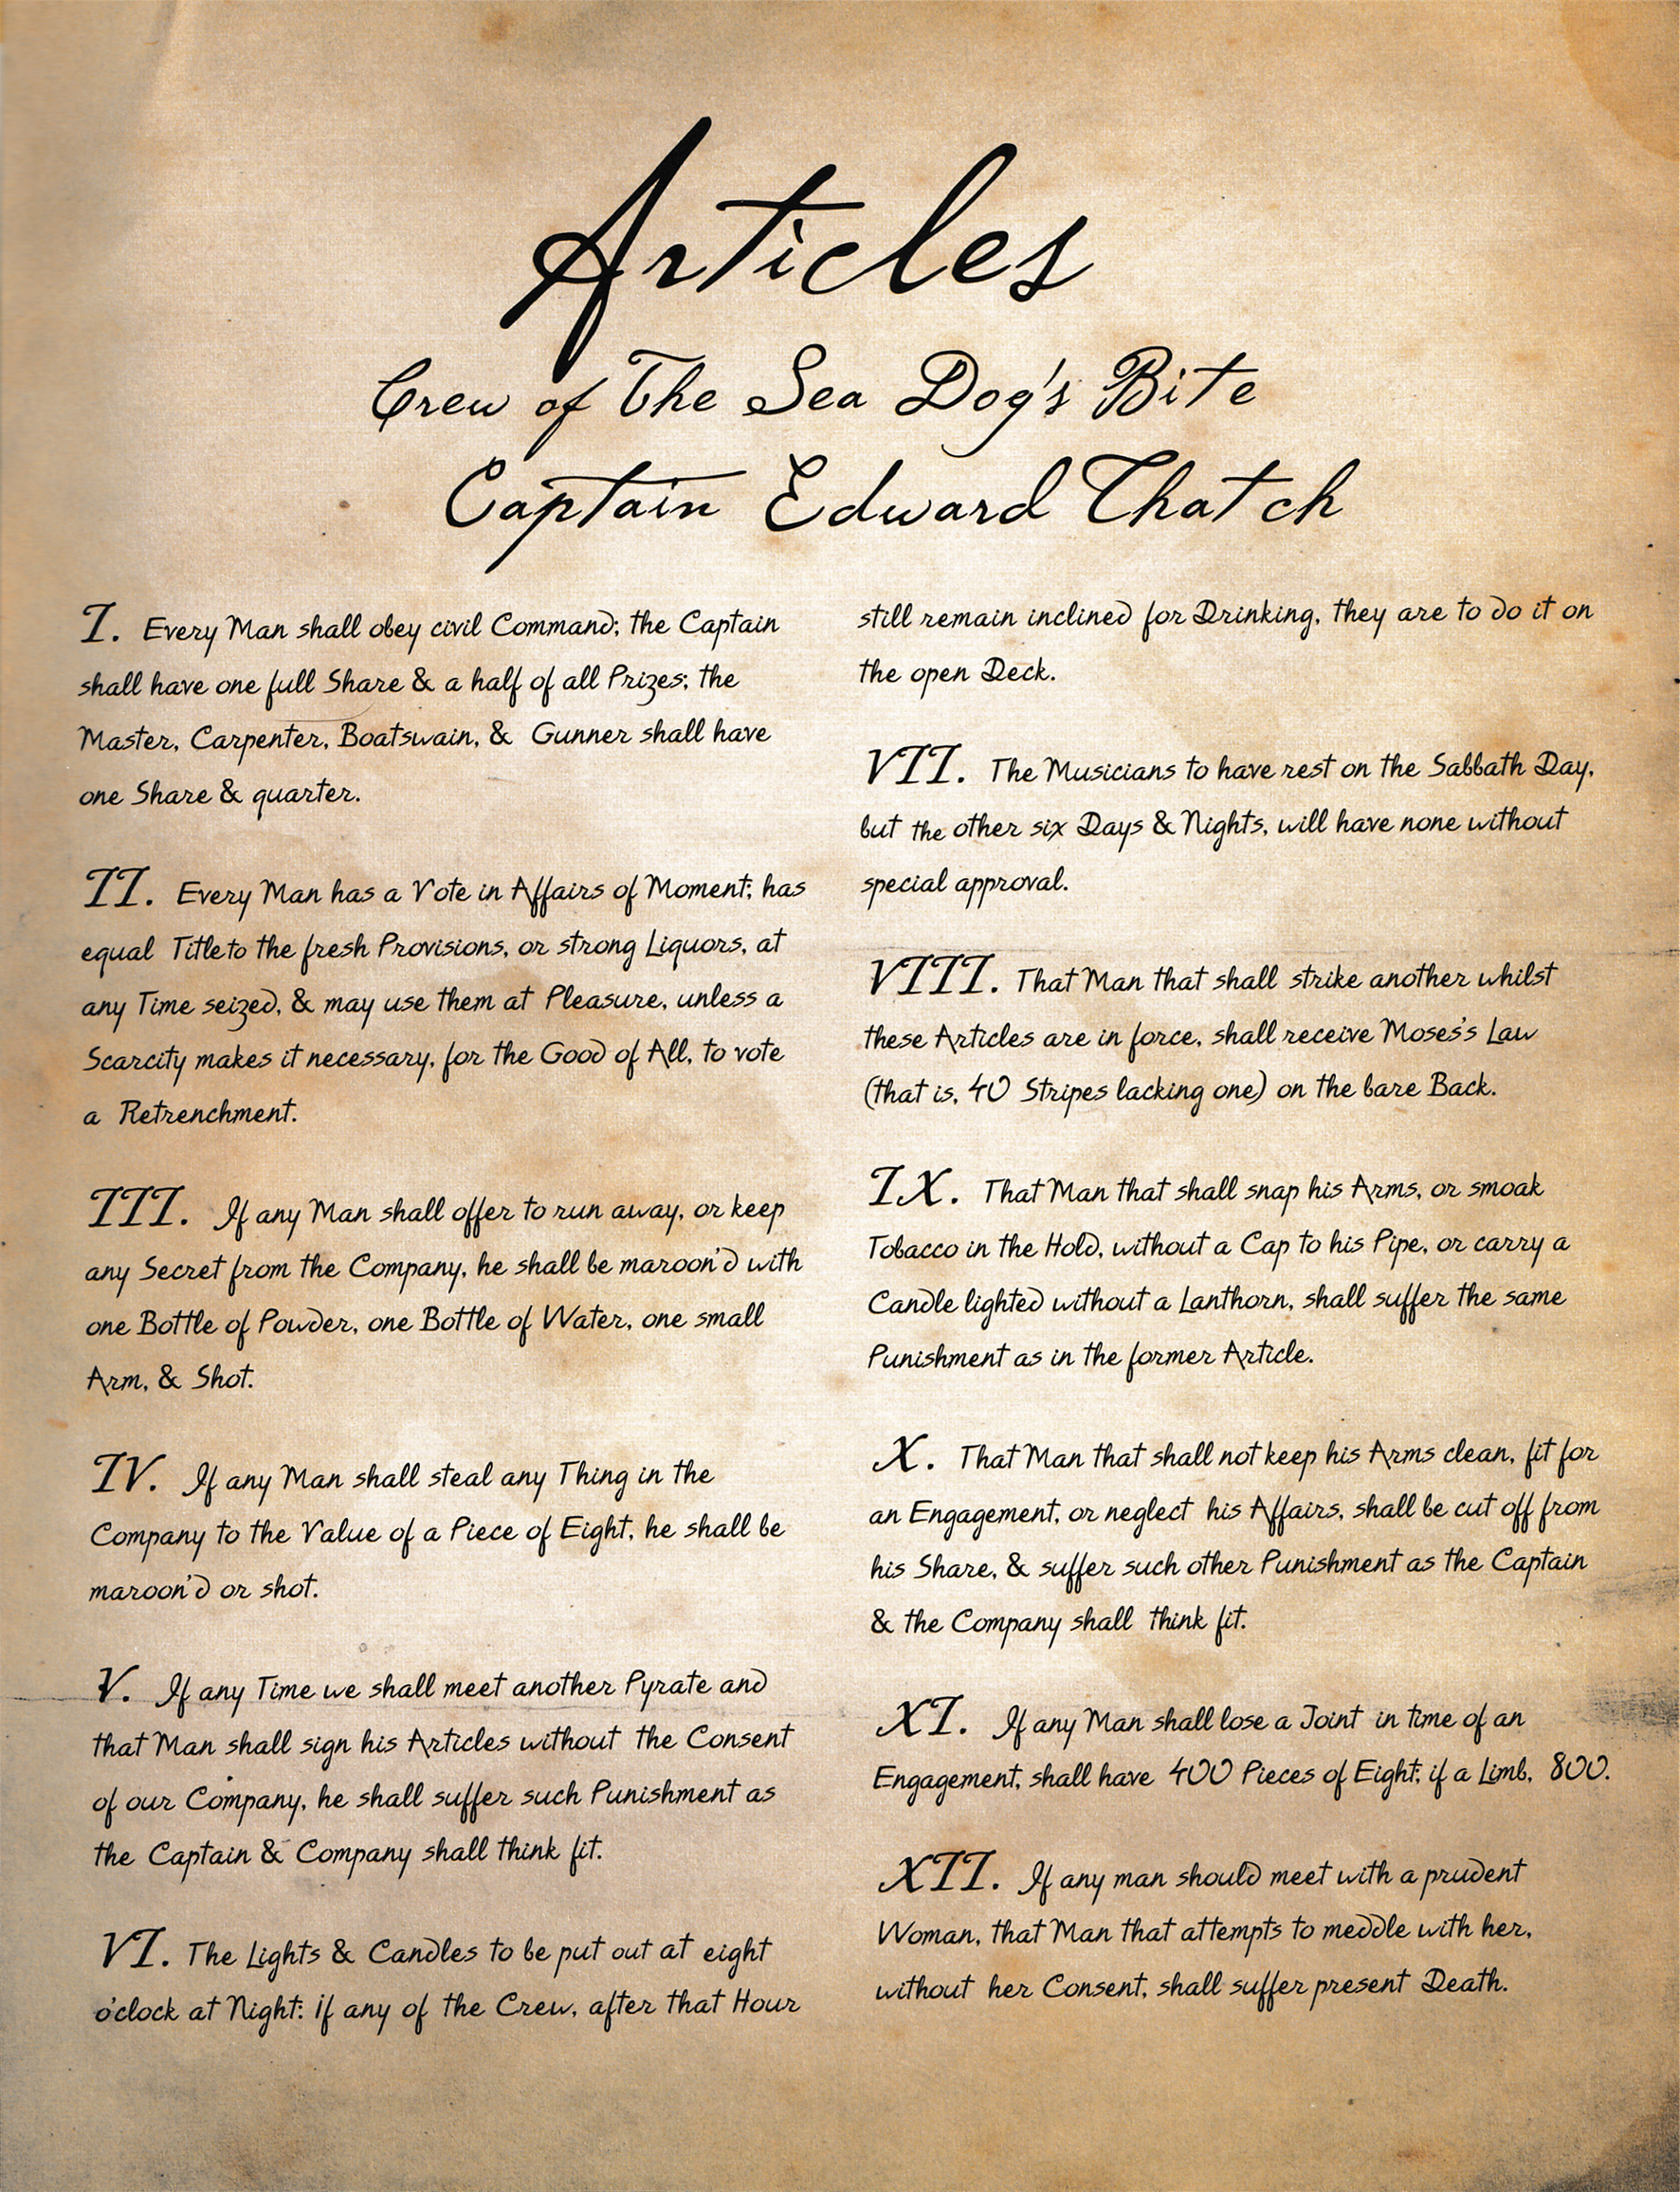 Pirate code of Edward Thatch, Assassin's Creed Wiki